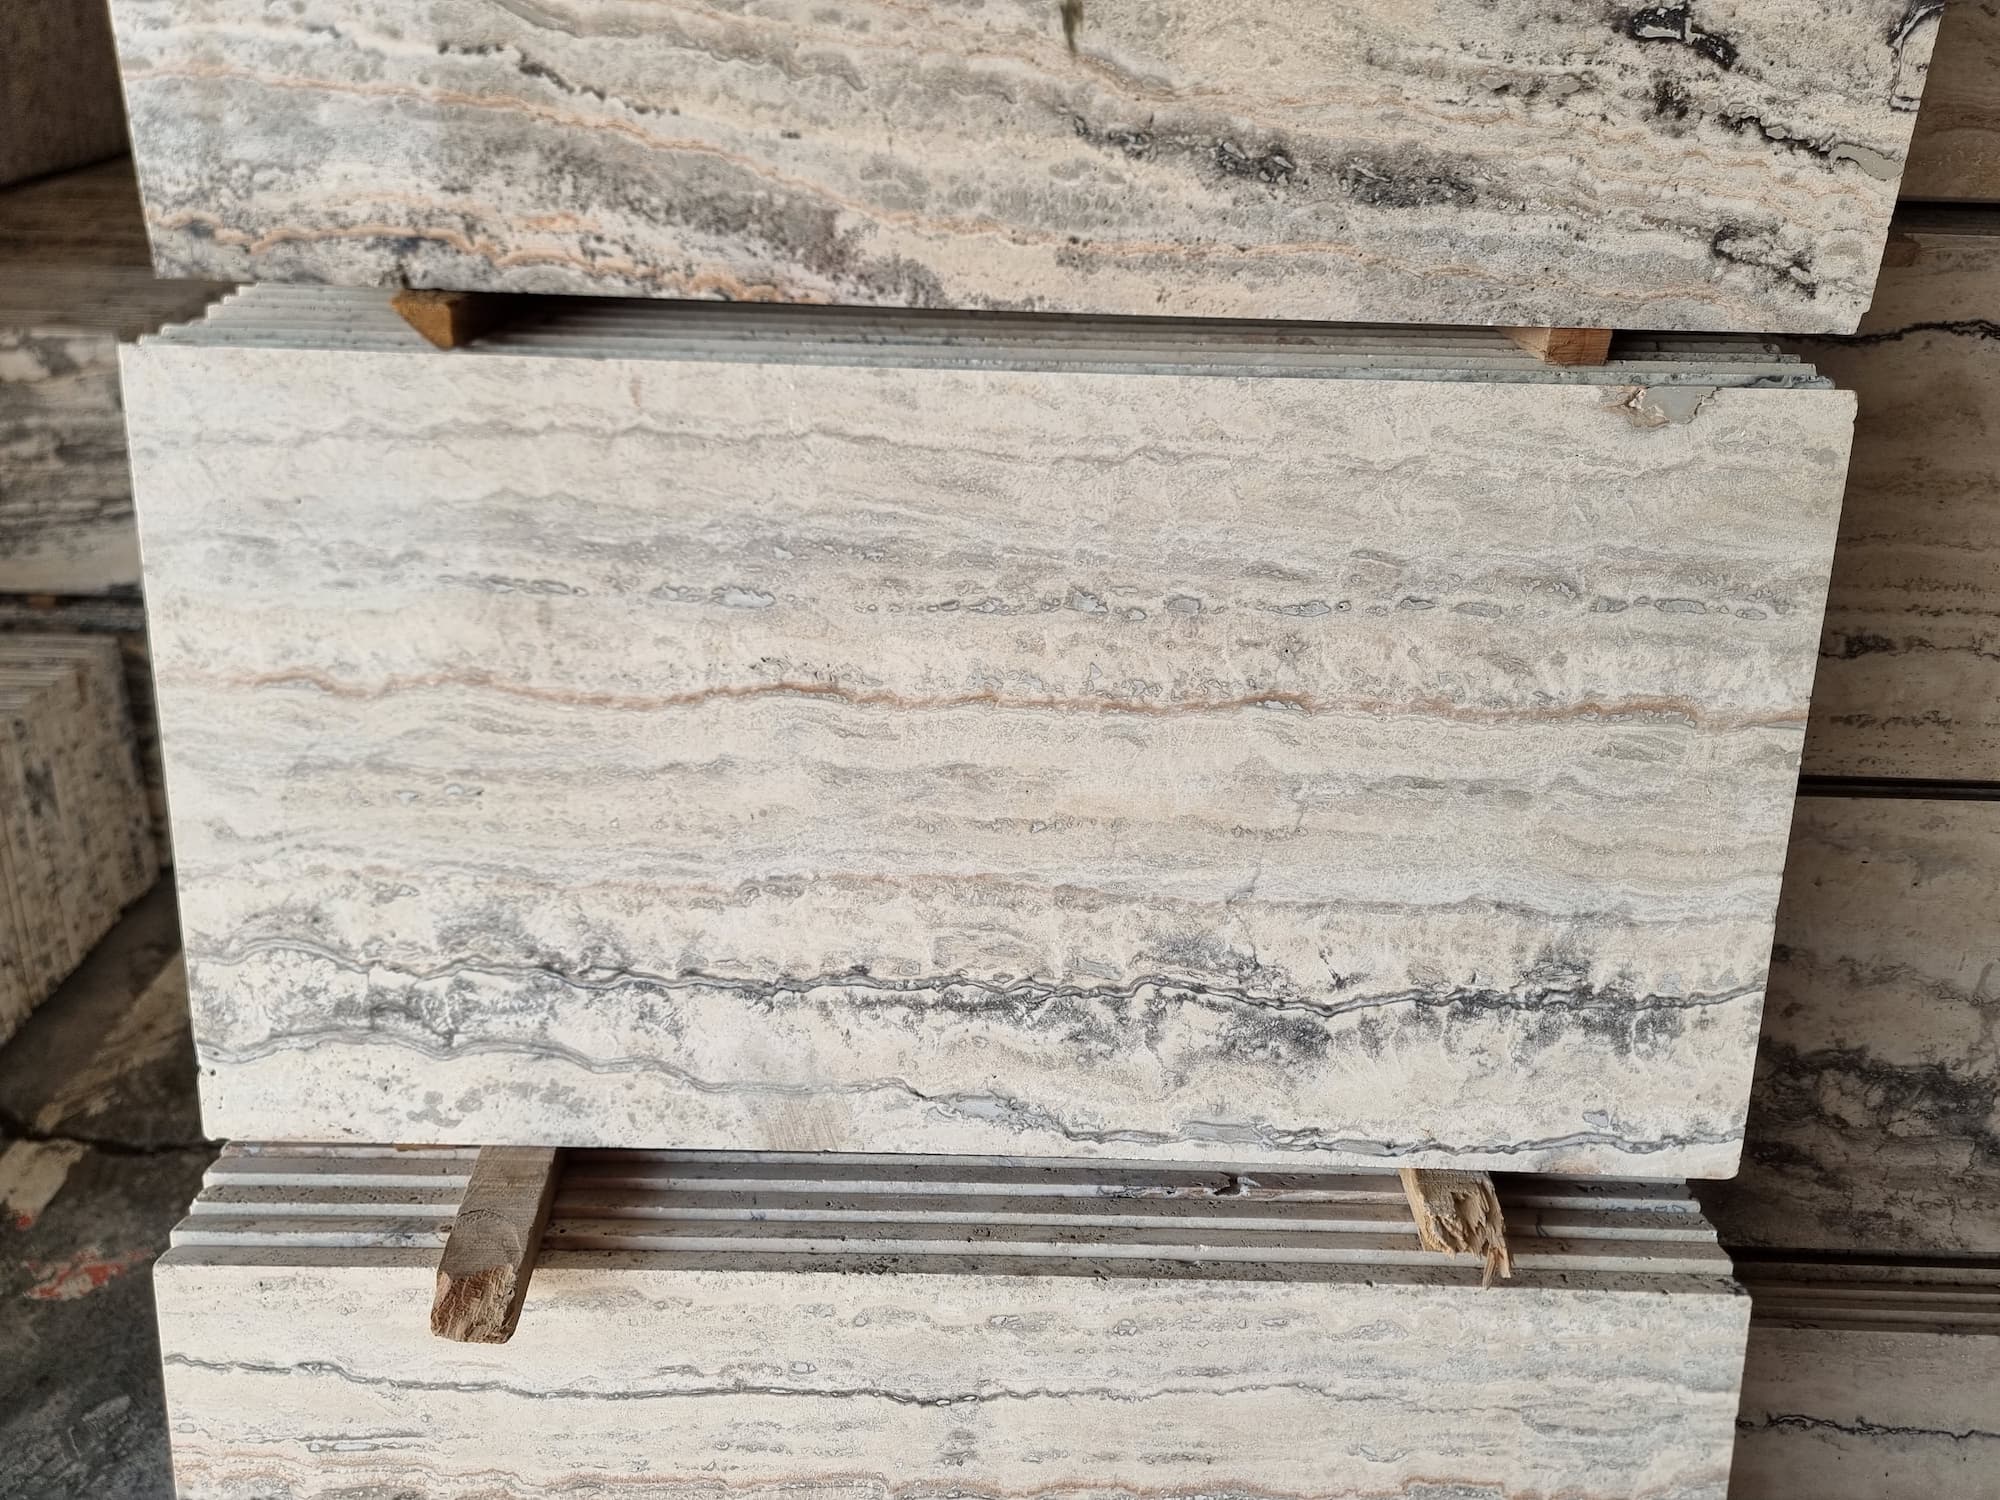 - The different colors and patterns of silver travertine